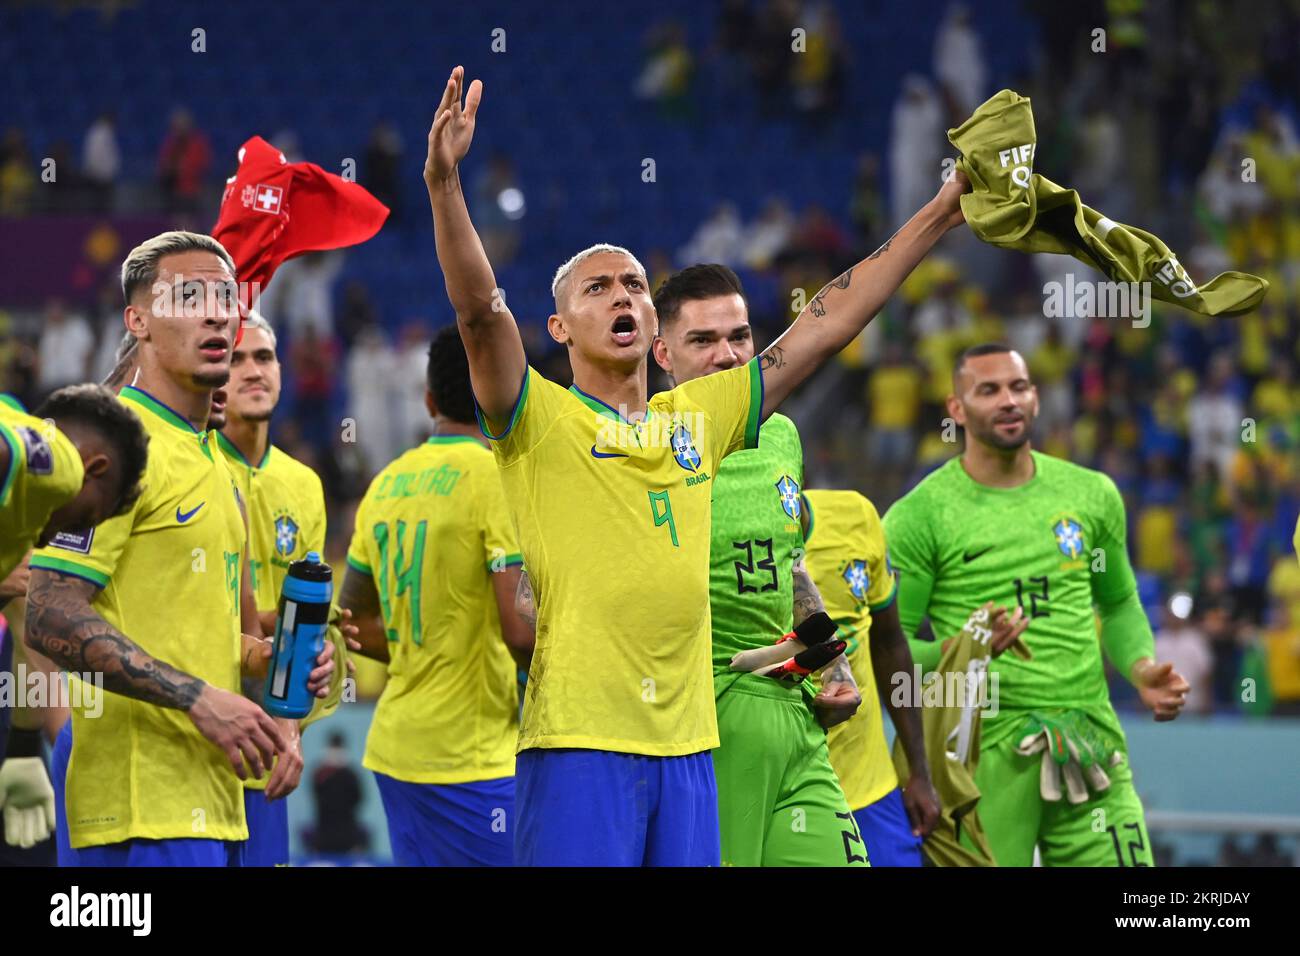 Doha, Qatar. 28th Nov, 2022. RICHARLISON (BRA), final jubilation, team photo, team, squad, team photo in front of the Brazilian fans, soccer fans, jubilation, joy, enthusiasm, action. Brazil (BRA) - Switzerland (SUI) 1-0 Group stage Group G on 28.11.2022, Stadium 974, Football World Cup 2022 in Qatar from 20.11. - 18.12.2022 ? Credit Credit: dpa picture alliance/Alamy Live News Stock Photo